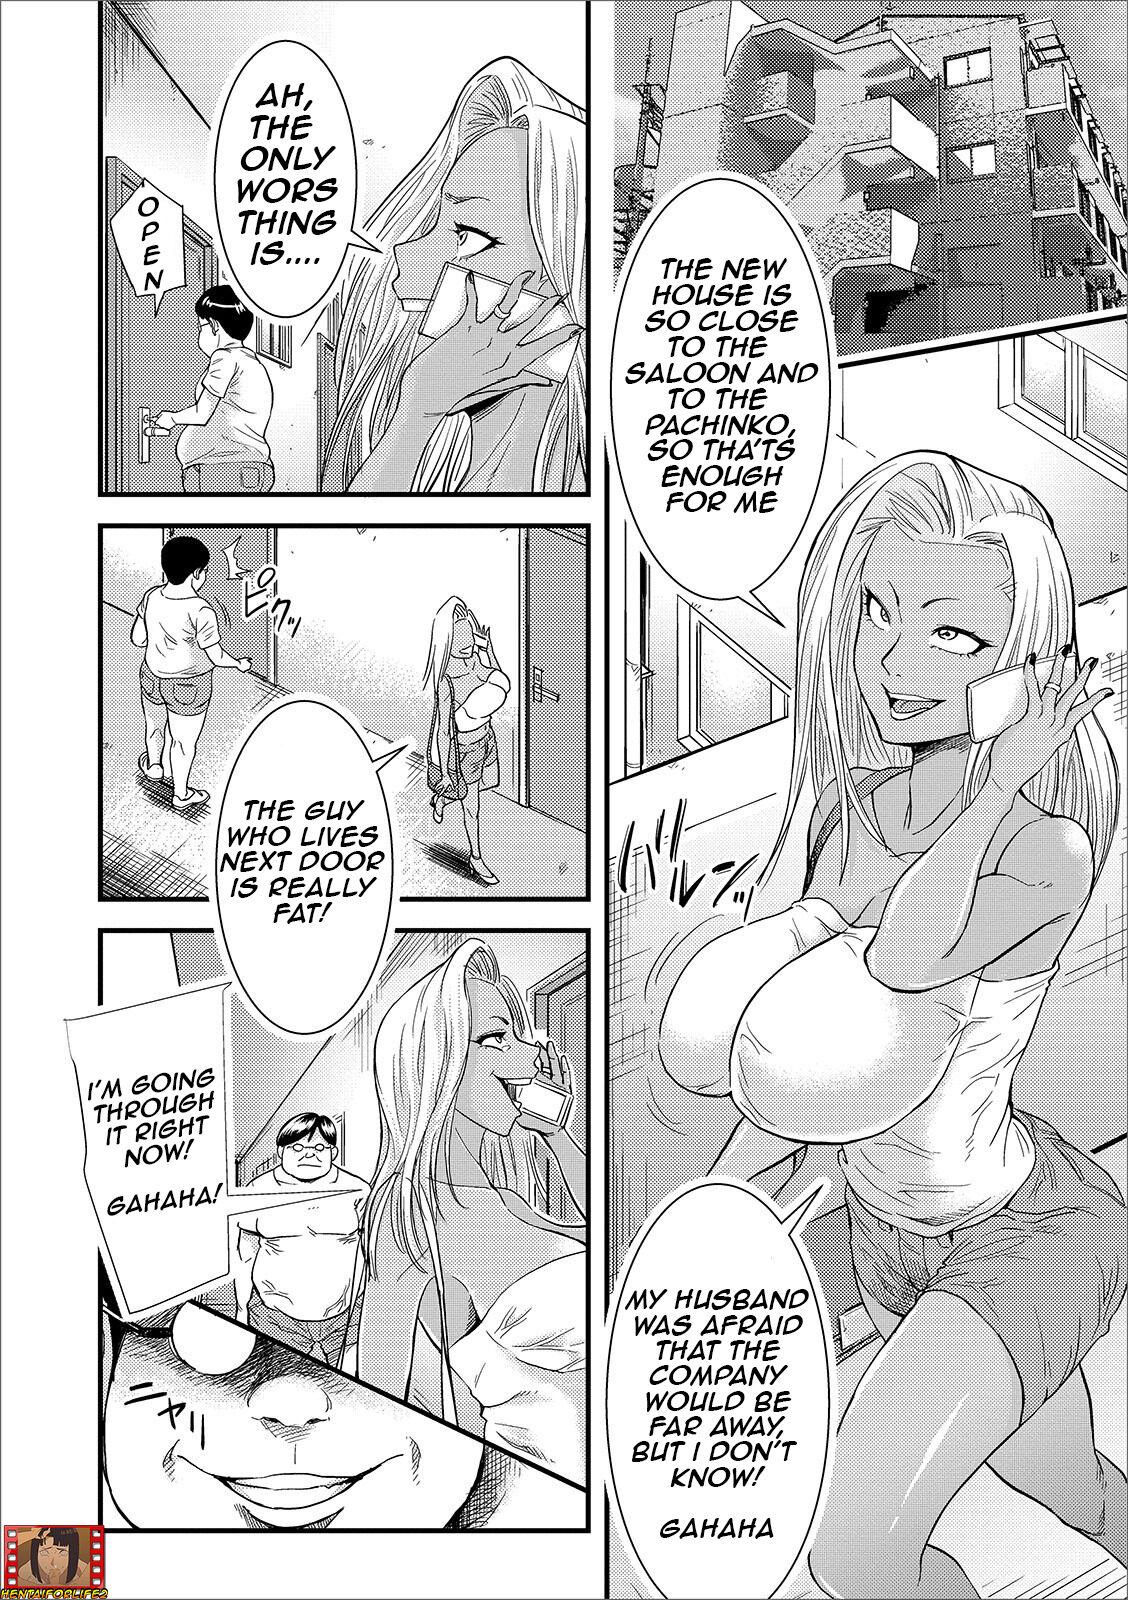 Tiny Tits Fat hypnotist VS Former Young Married Woman - Original Argenta - Page 2